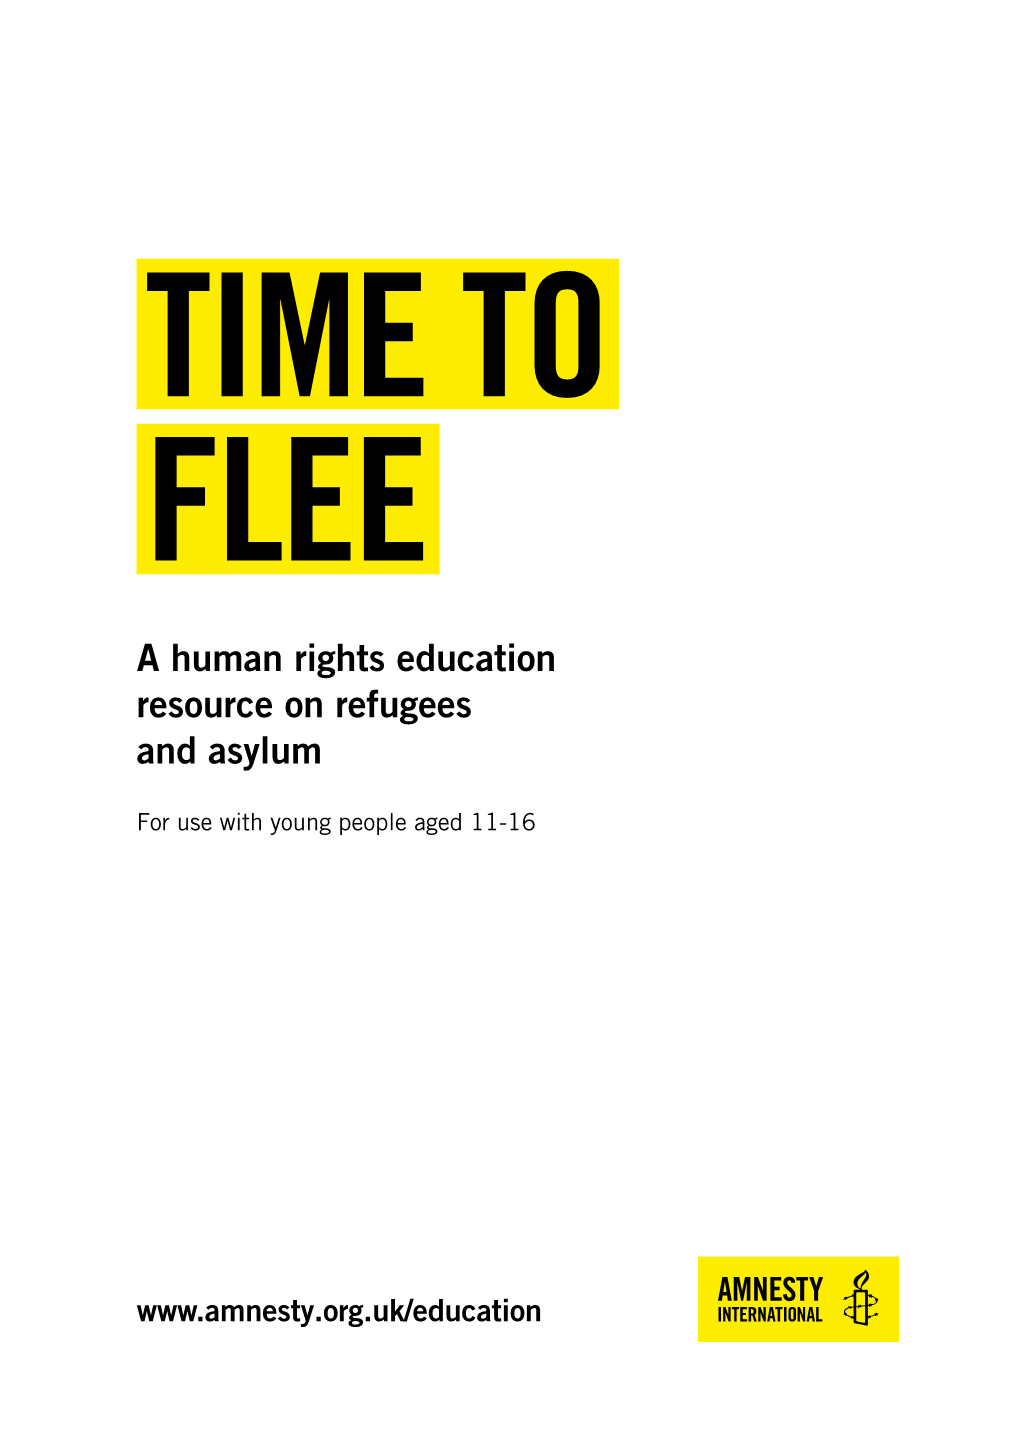 A Human Rights Education Resource on Refugees and Asylum